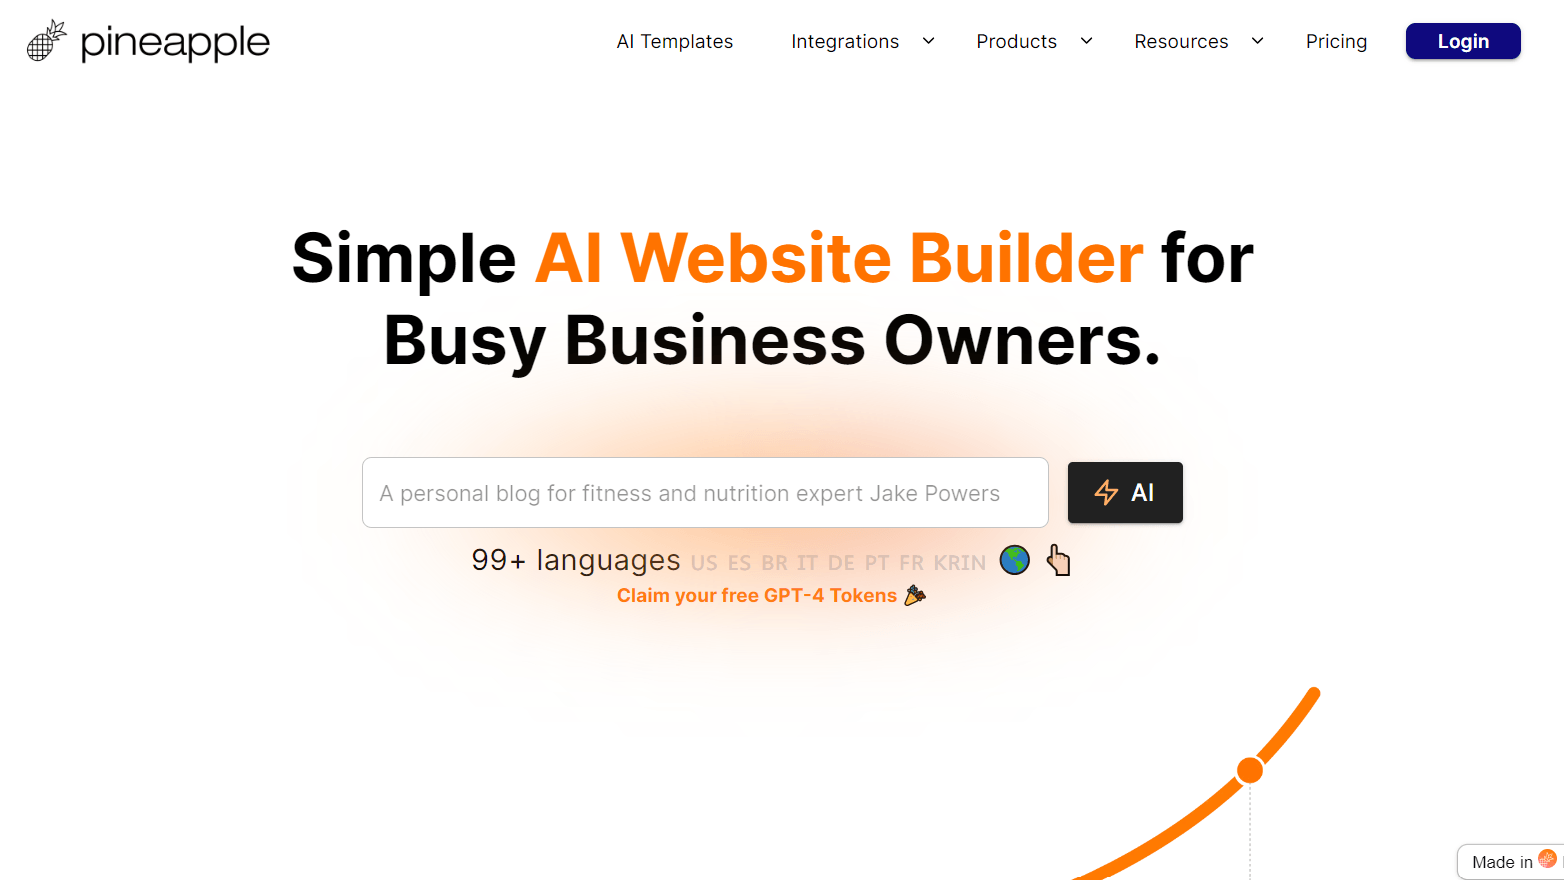 Pineapple - Efficient Website Builder for Busy Business Owners